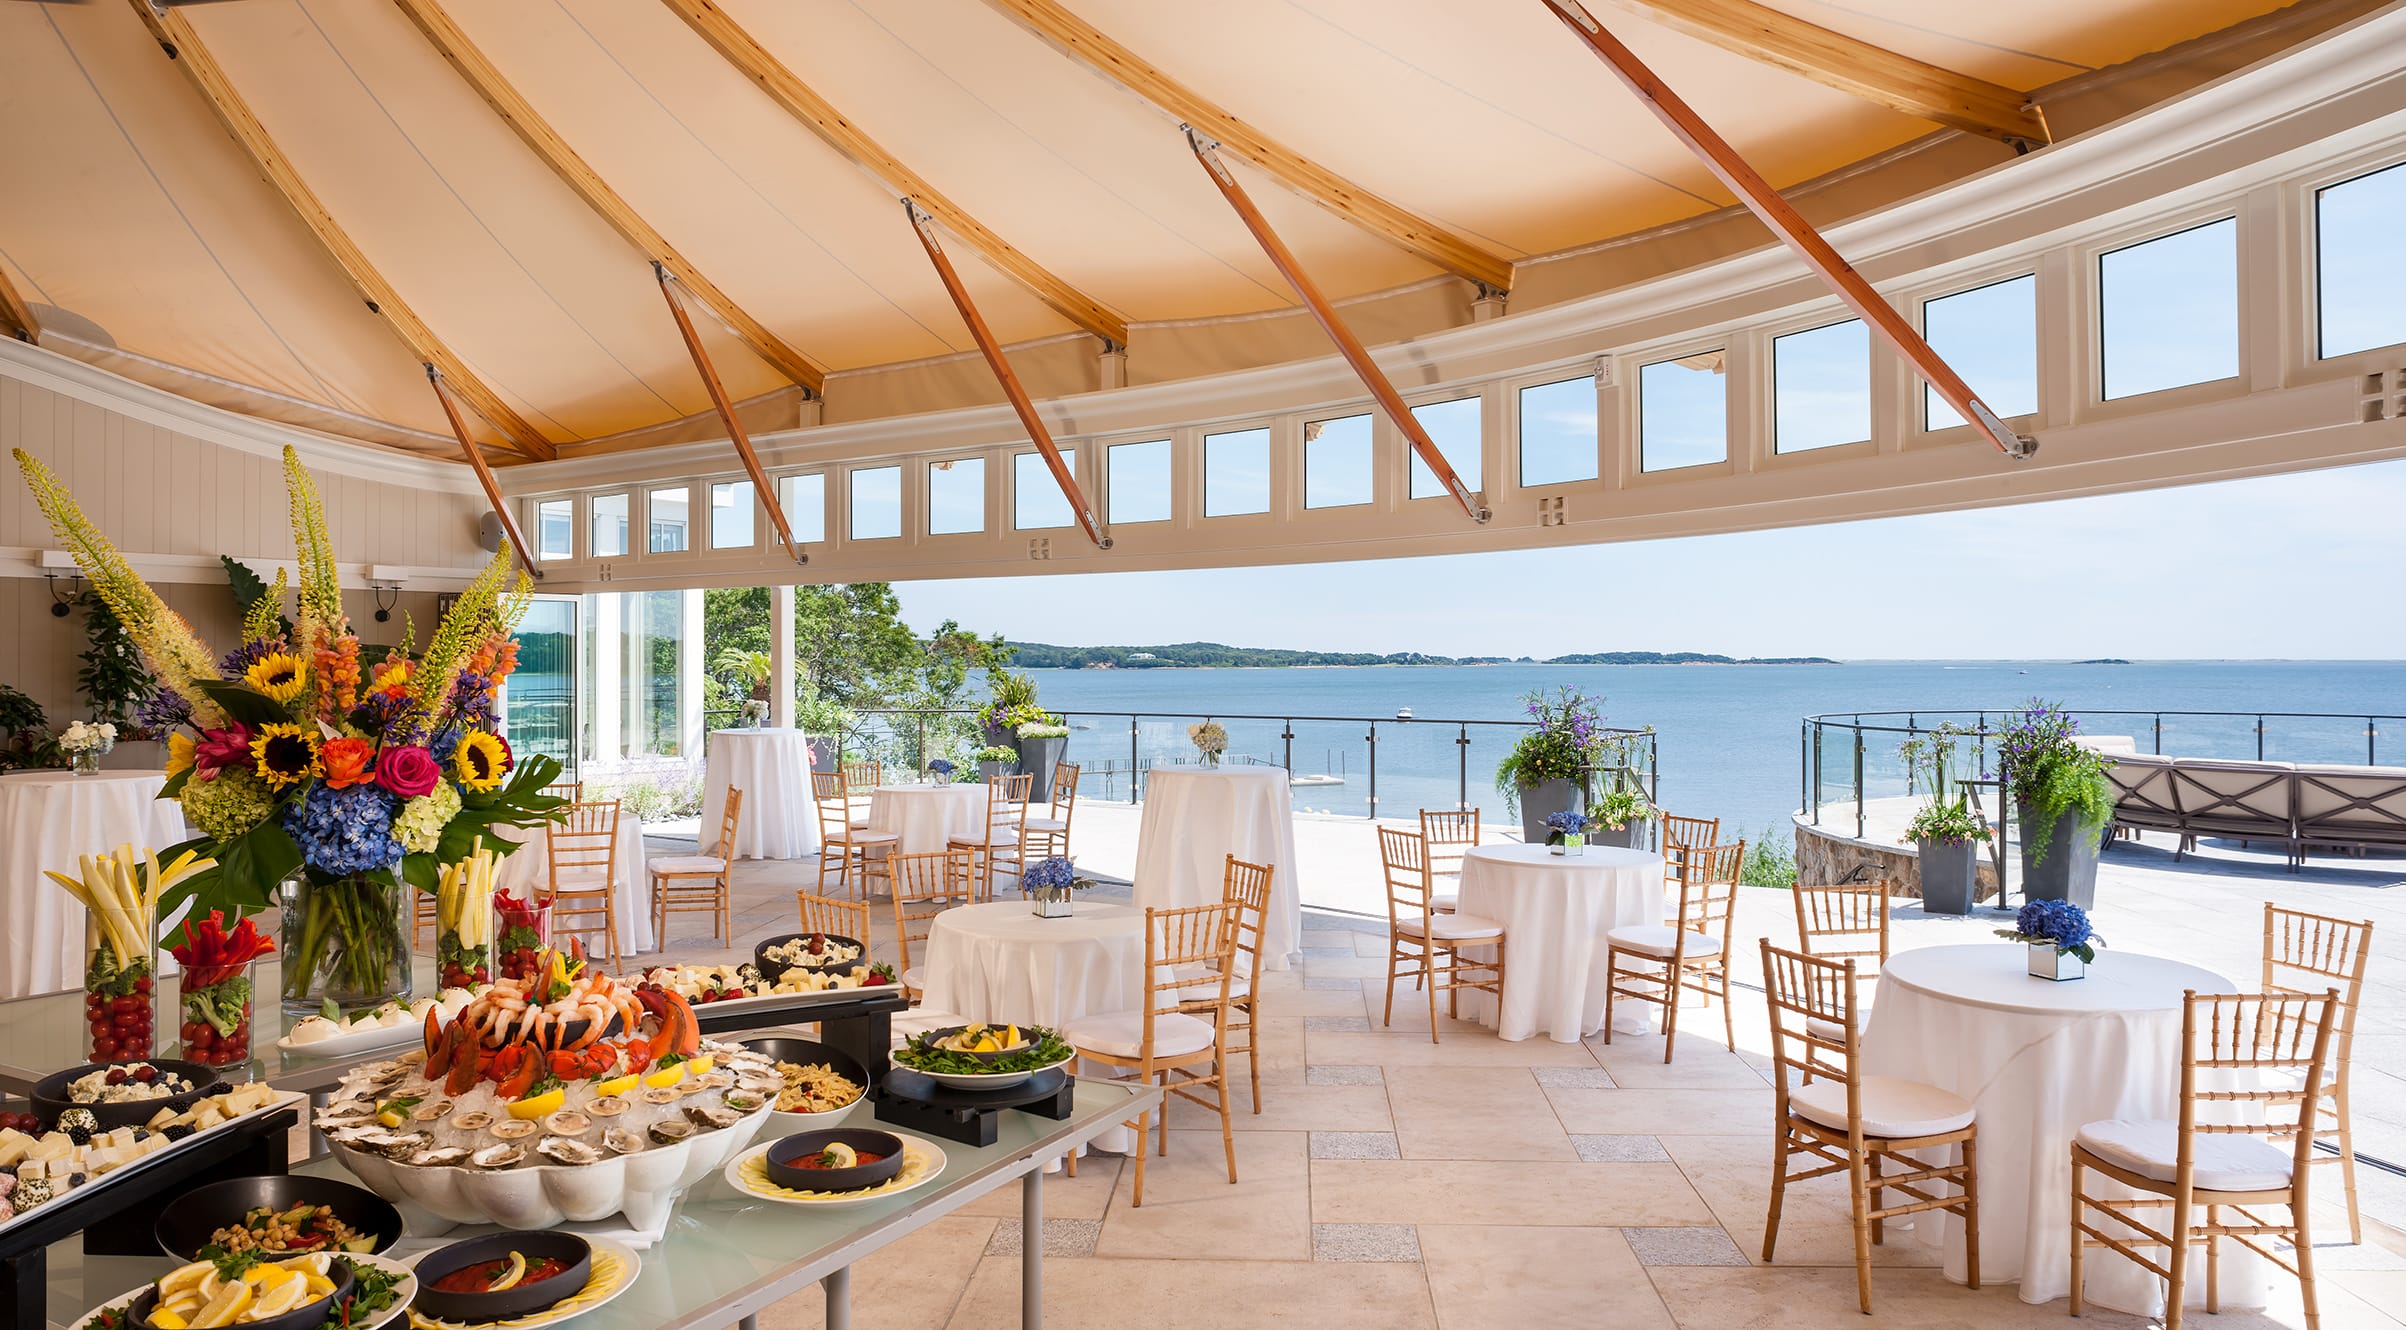 Waterview buffet dining at Cape Cod resort restaurant